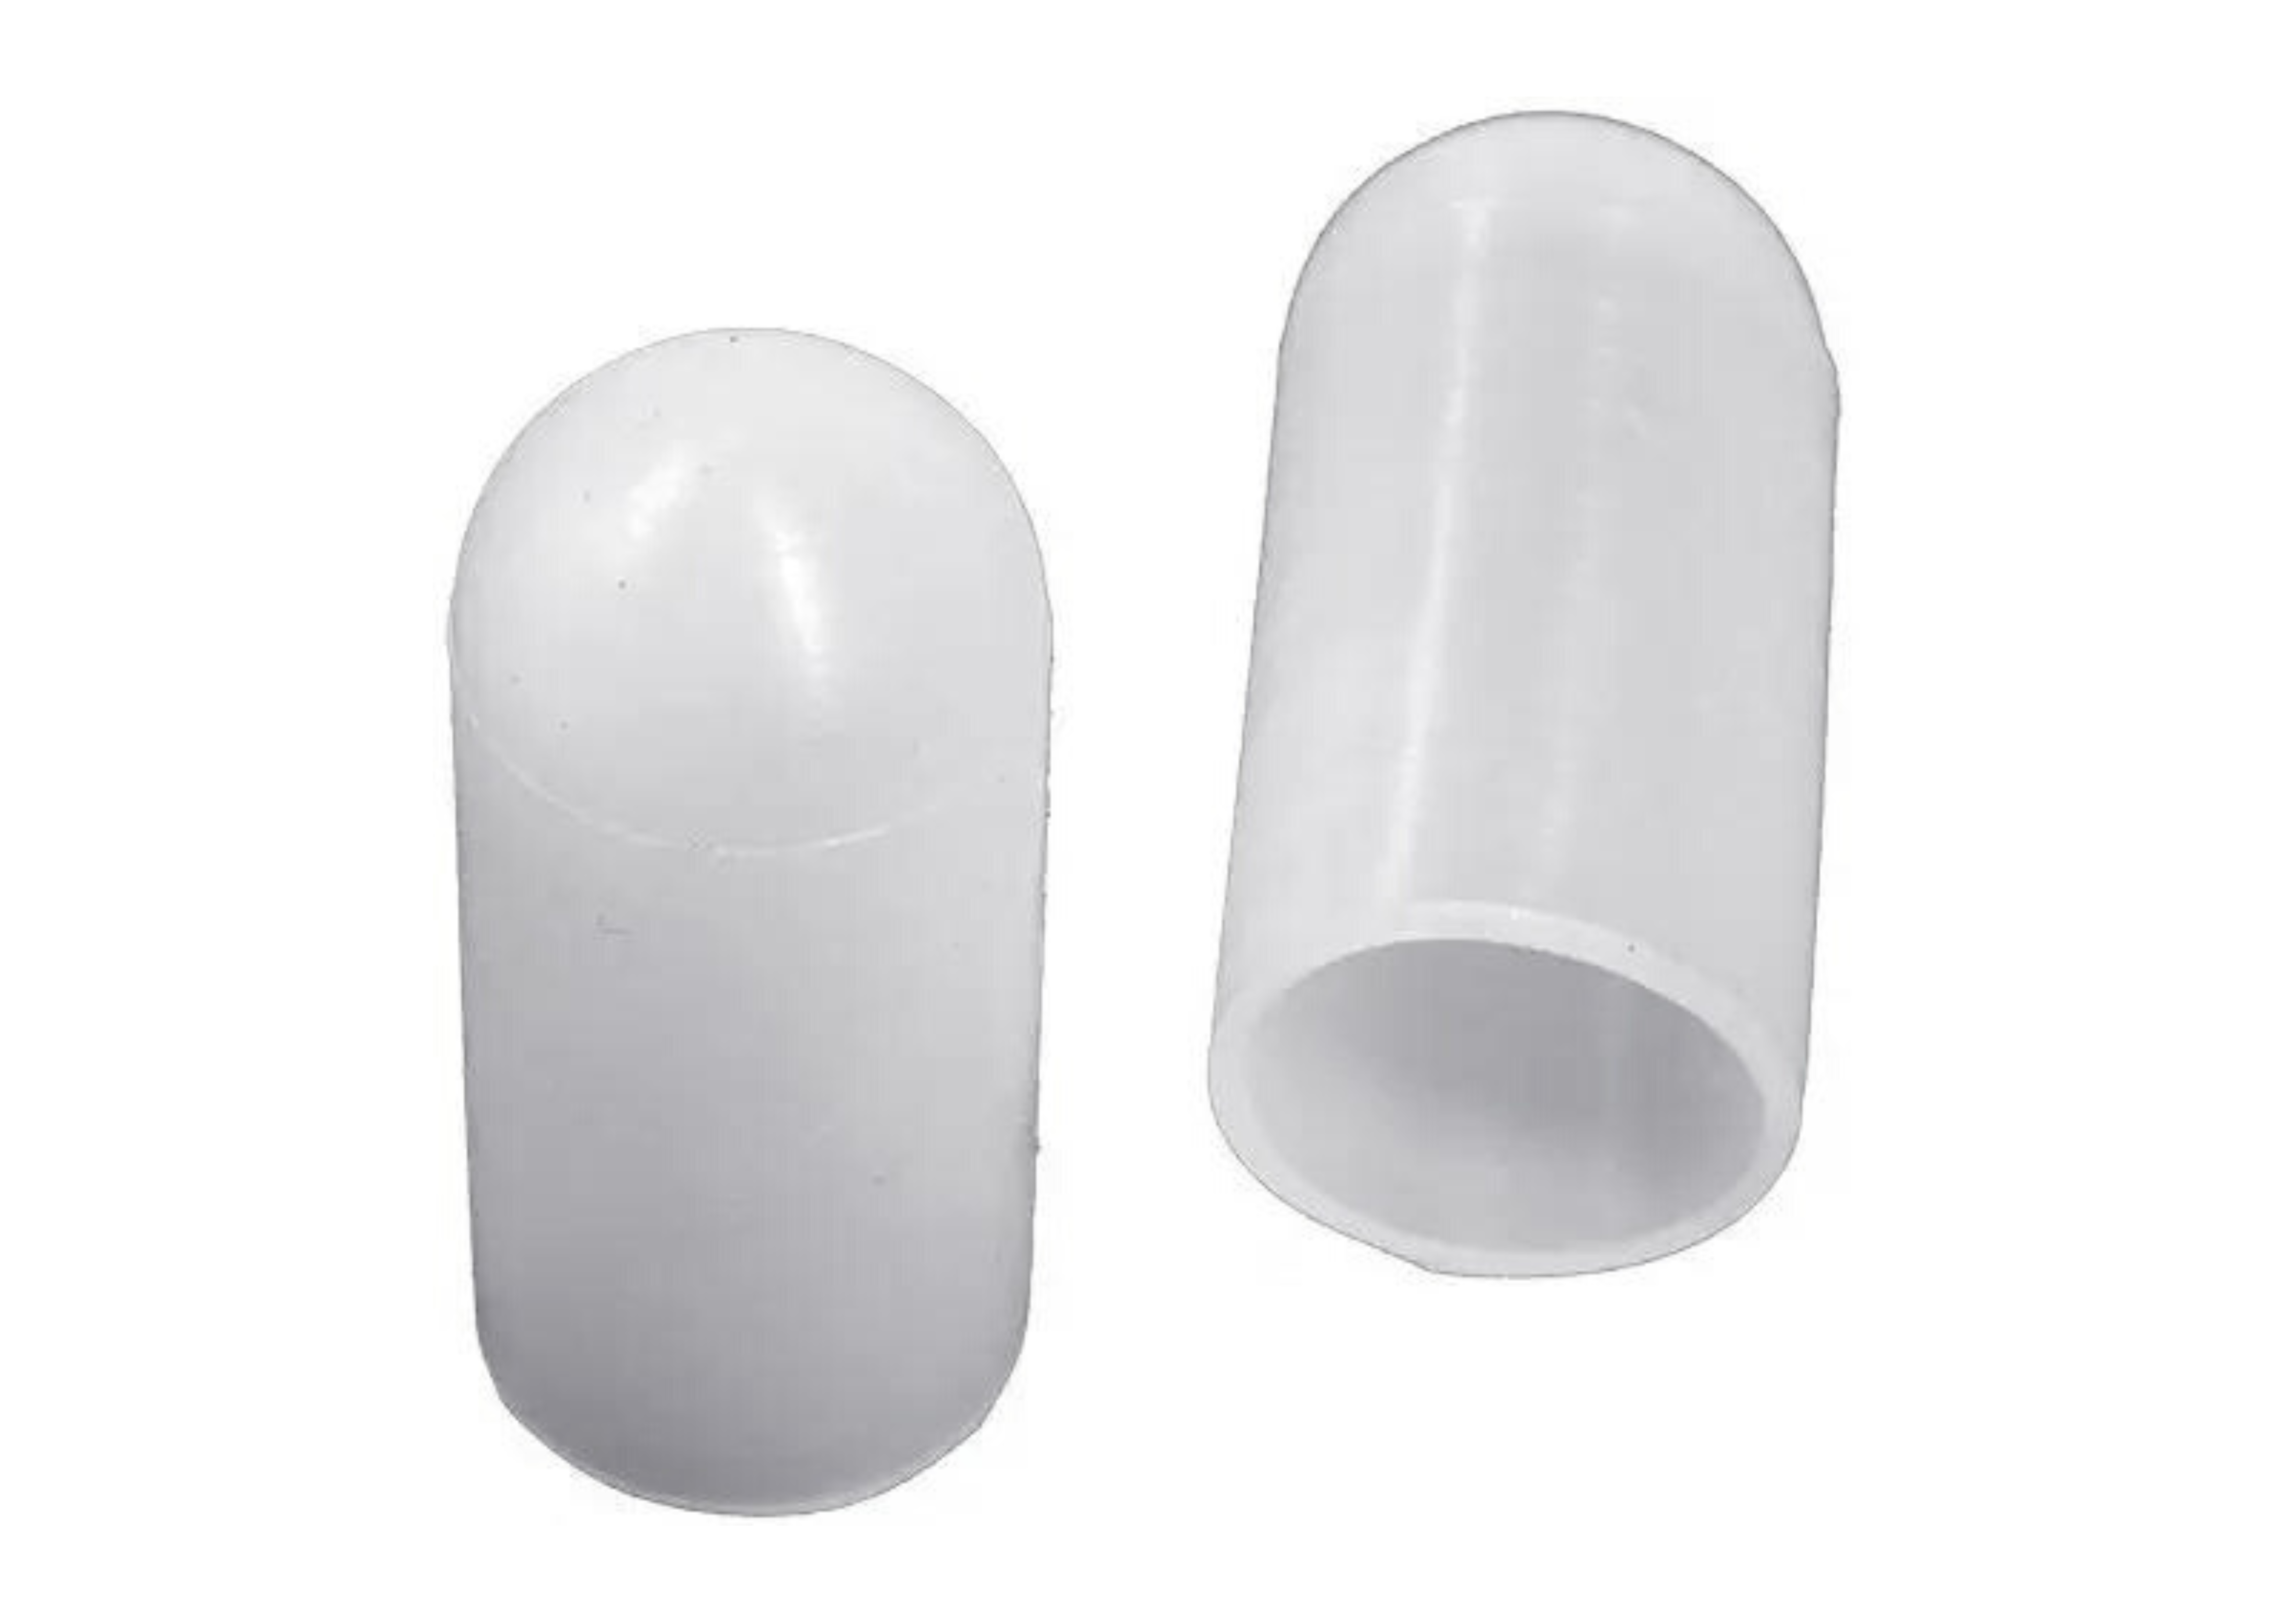 Additional protection caps for nasal probes